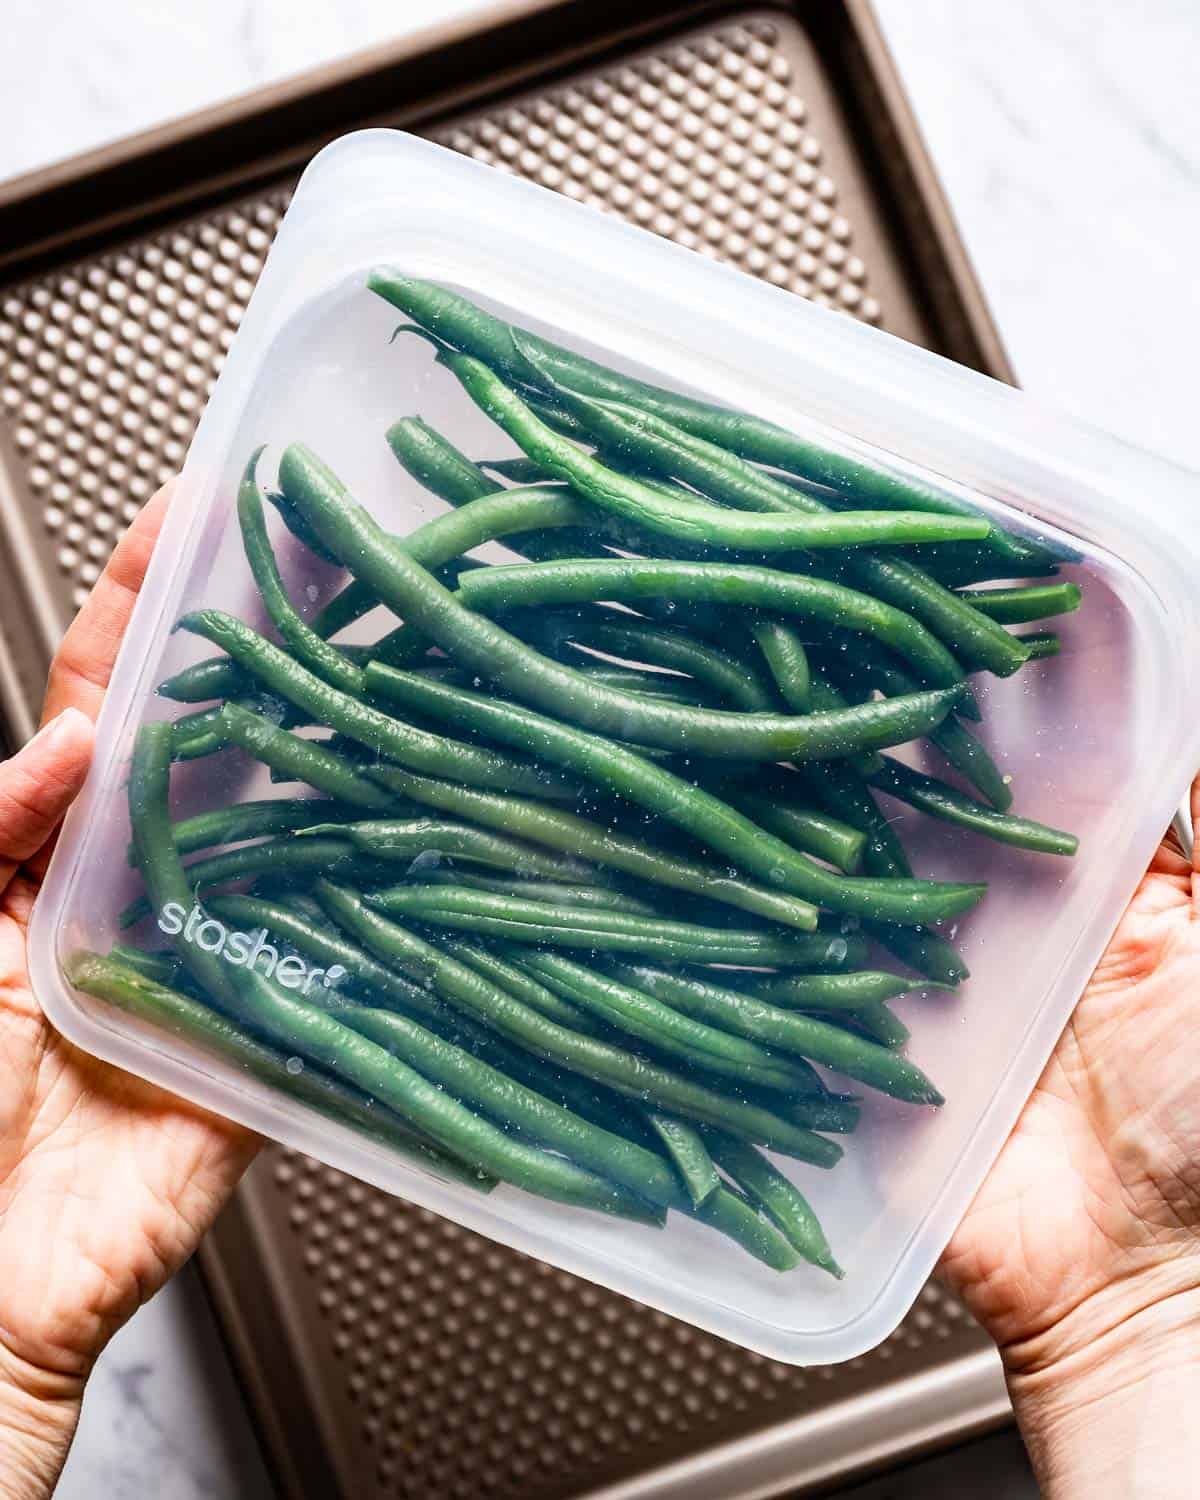 storing green beans in a plastic pouch